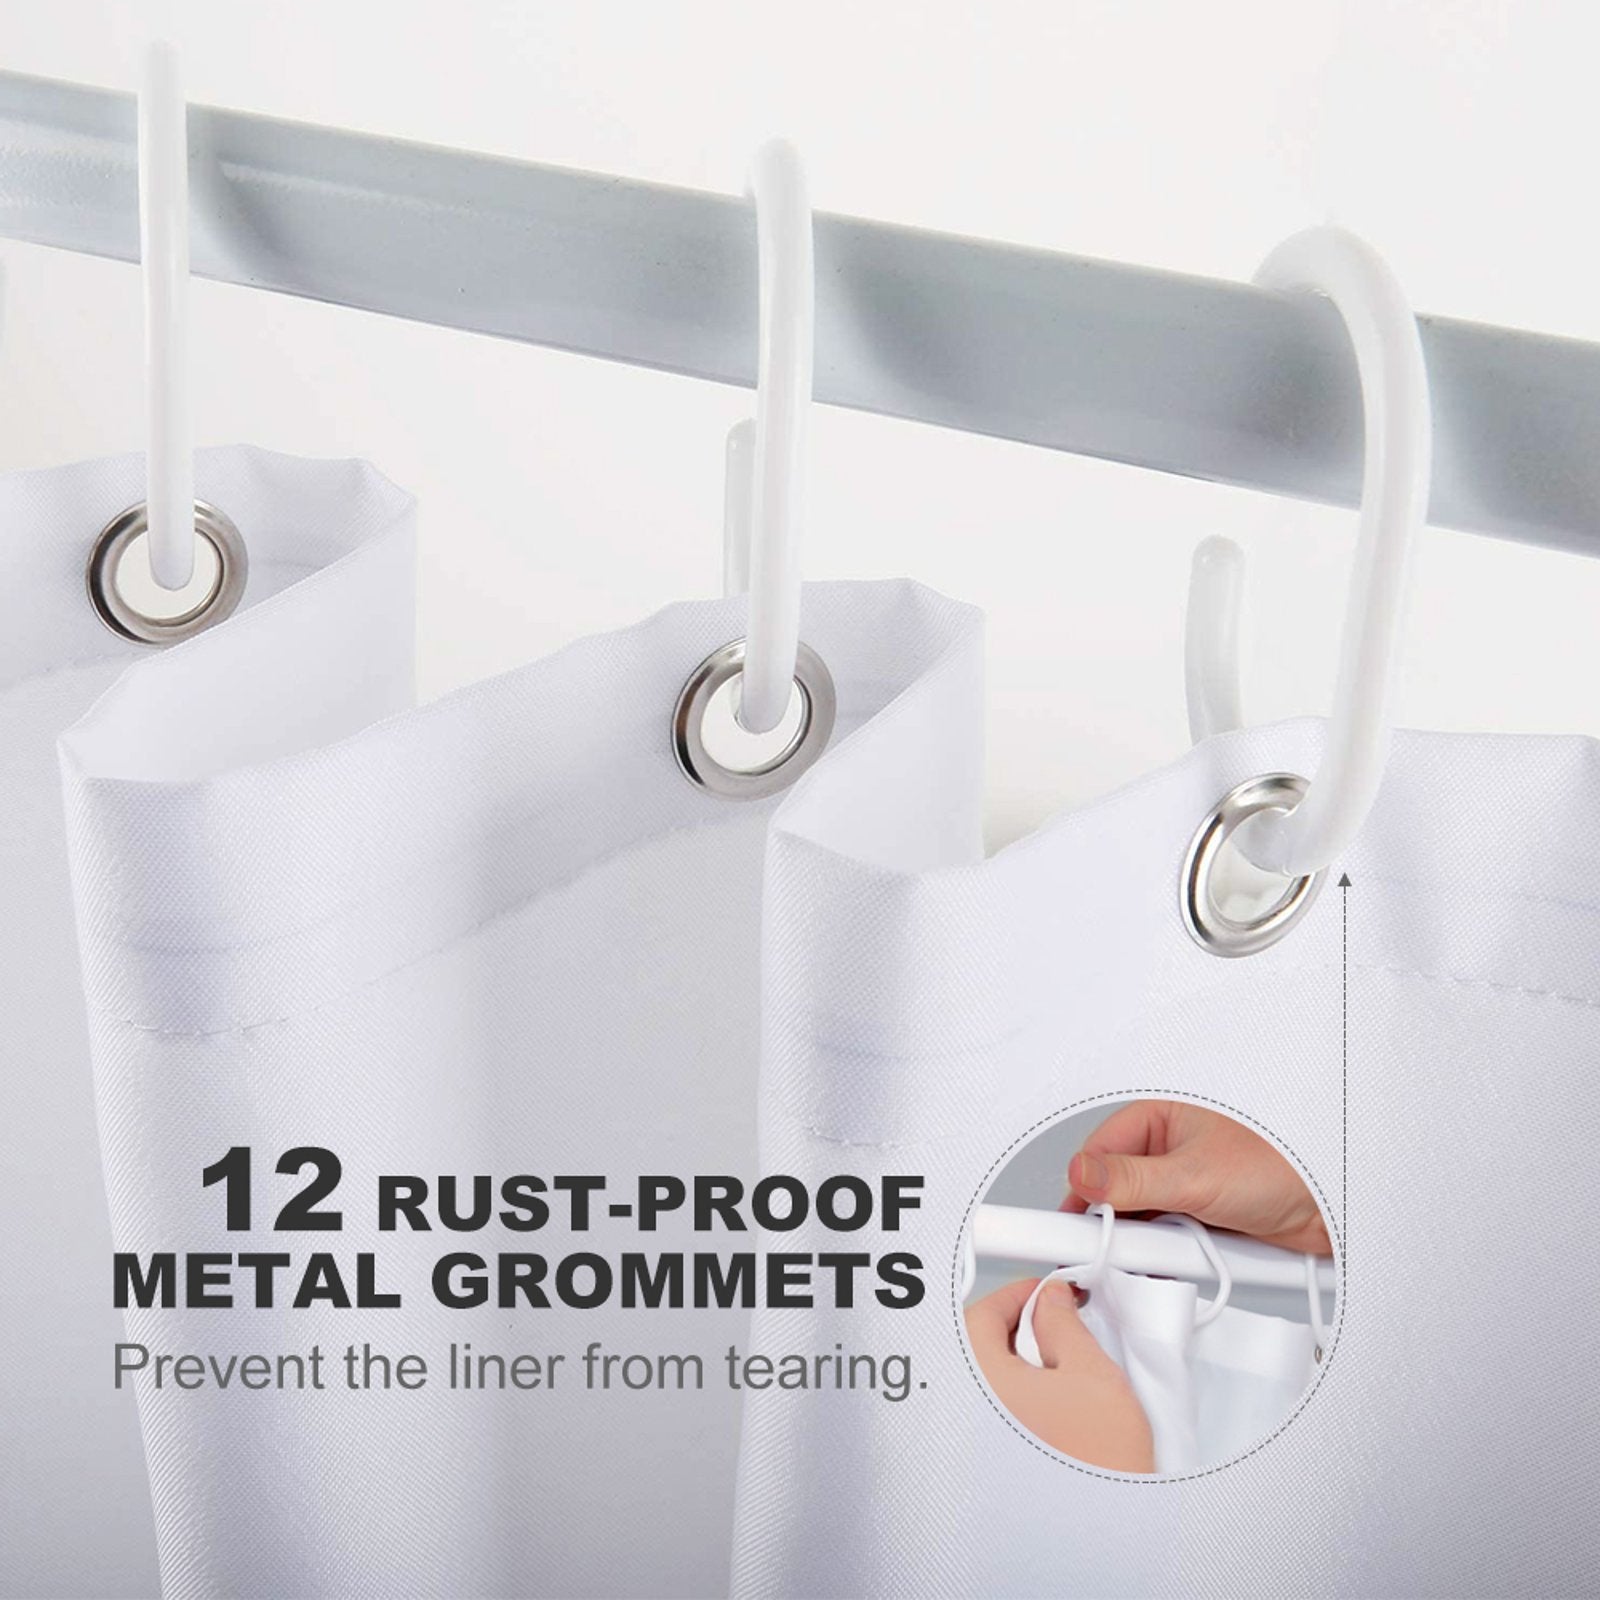 Powerful Elephant Shower Curtain-Cottoncat with 12 rust-proof metal grommets hanging on a rod. Close-up inset shows fingers holding a grommet. Text reads: "12 rust-proof metal grommets. Prevent the liner from tearing." A majestic addition to your bathroom decor by Cotton Cat.